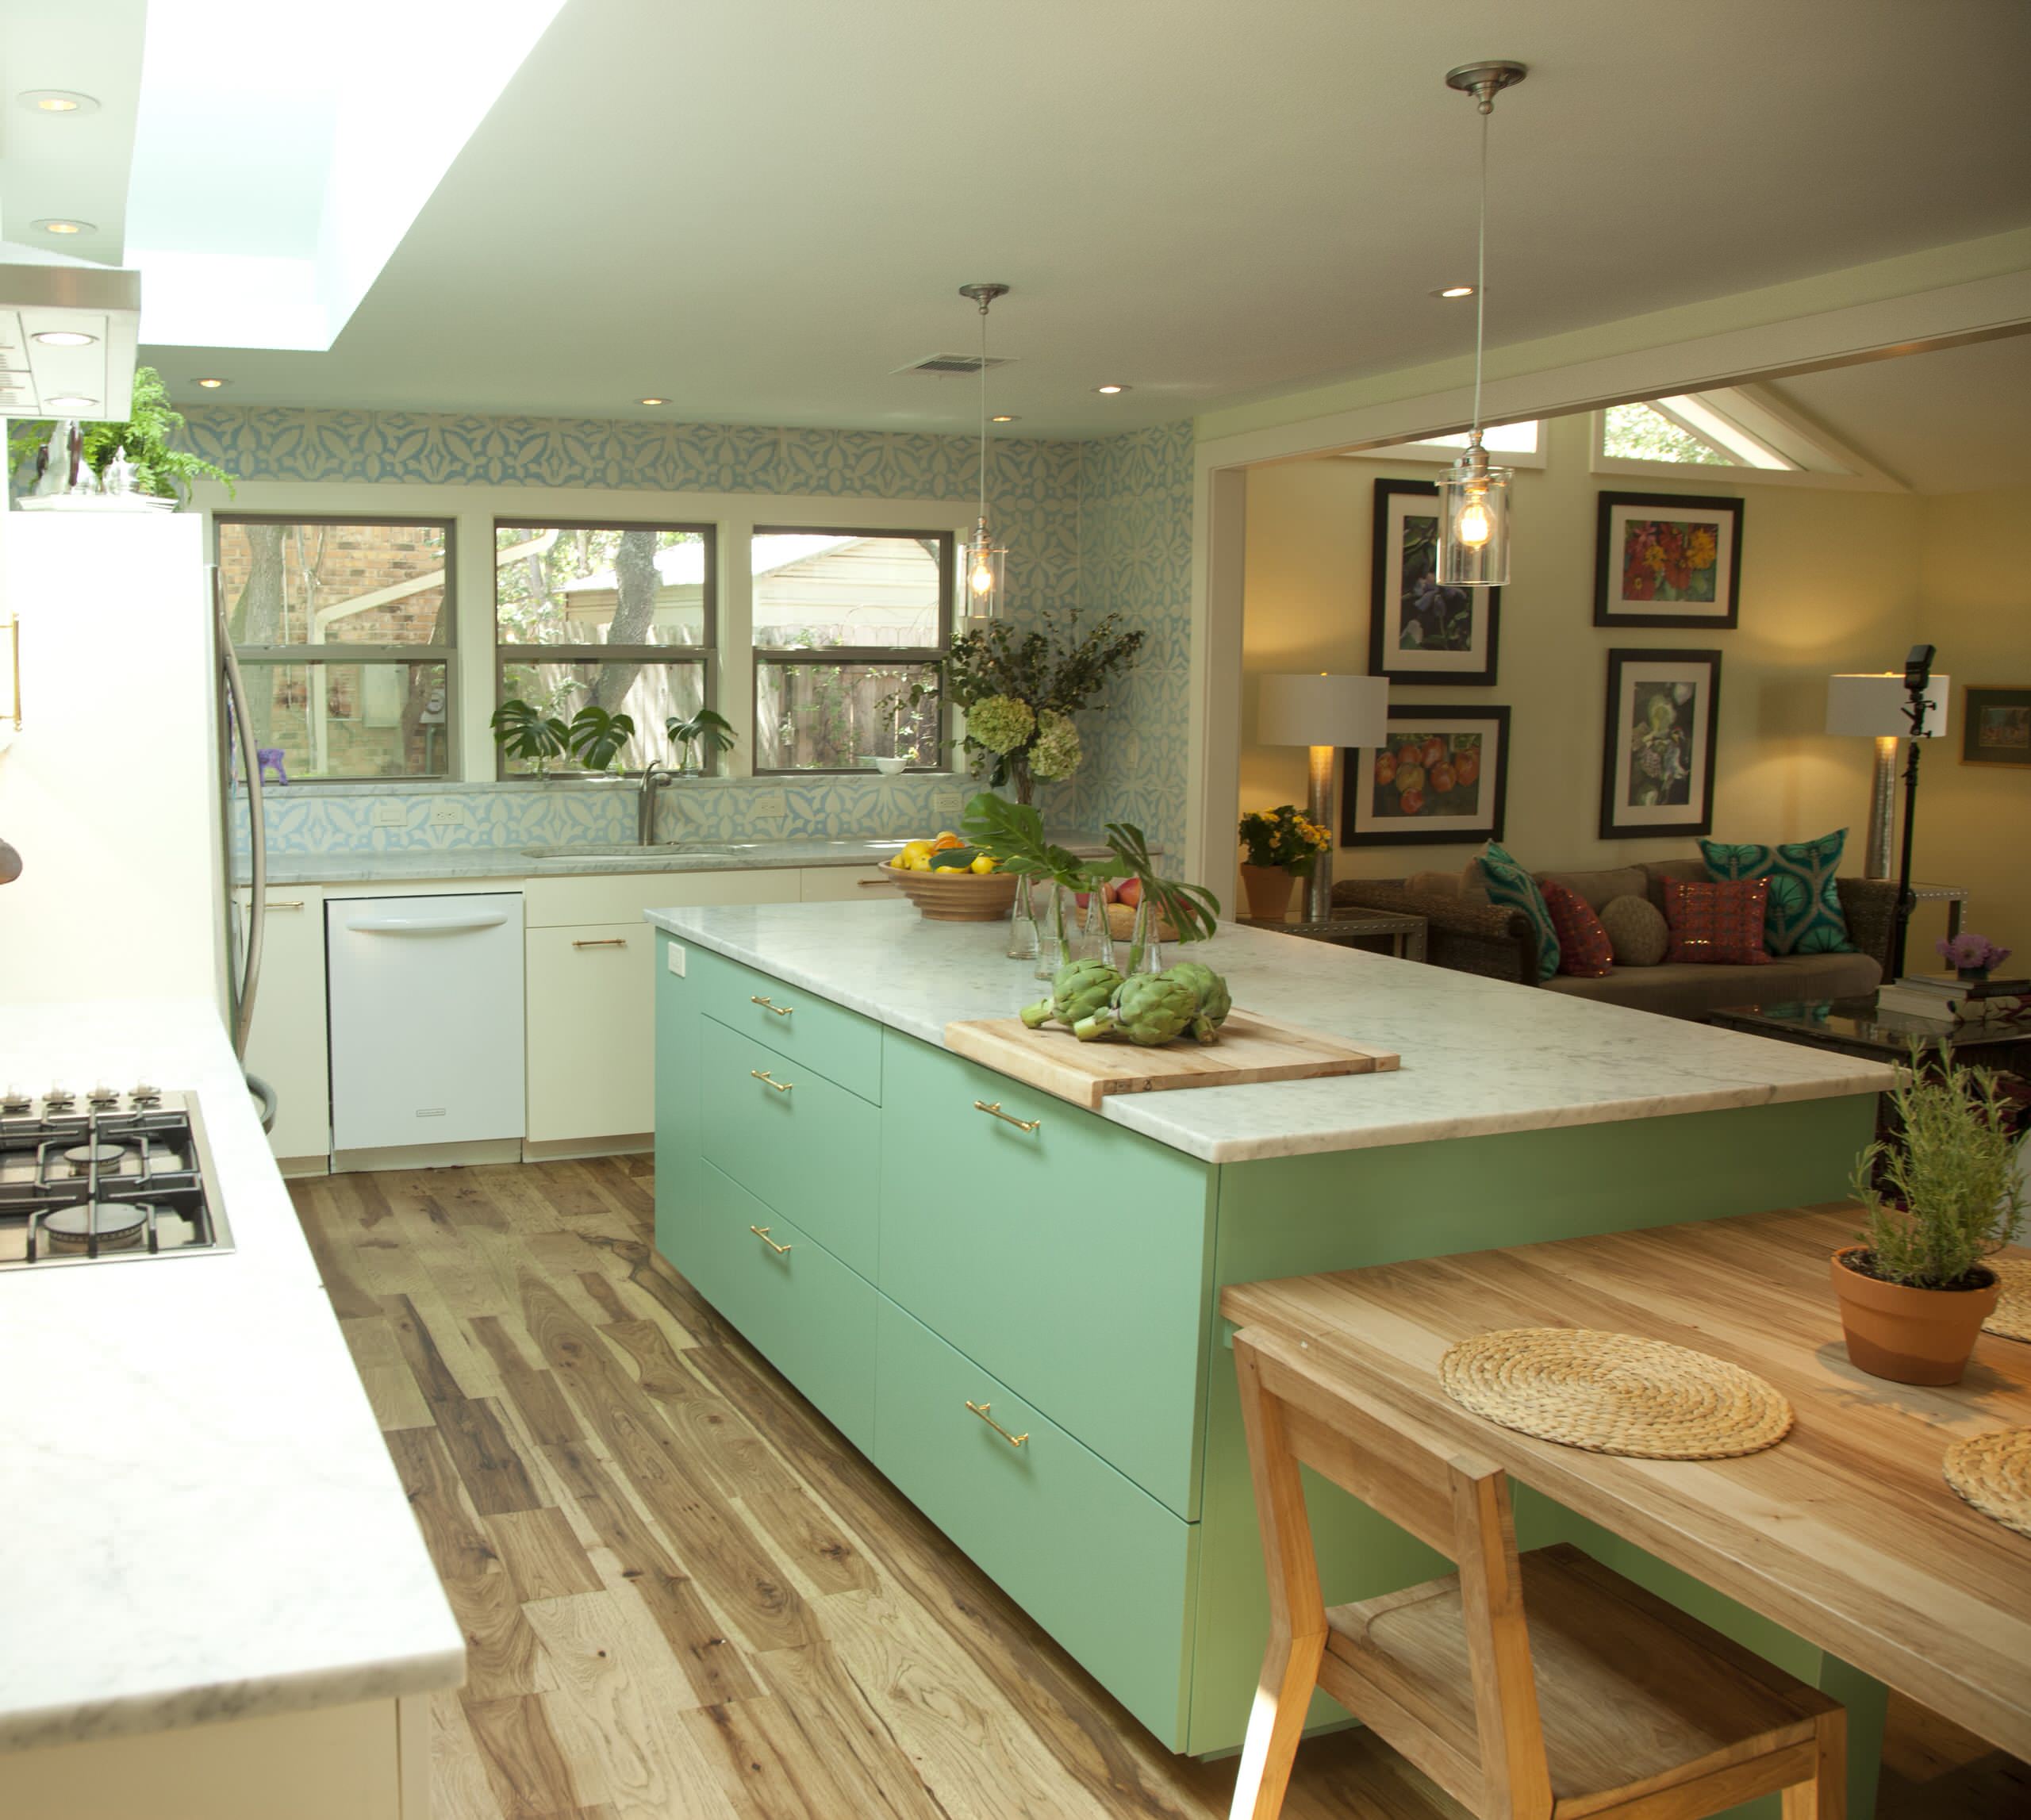 Premium AI Image  Turquoise kitchen cabinets with a wooden countertop and  a white stove.